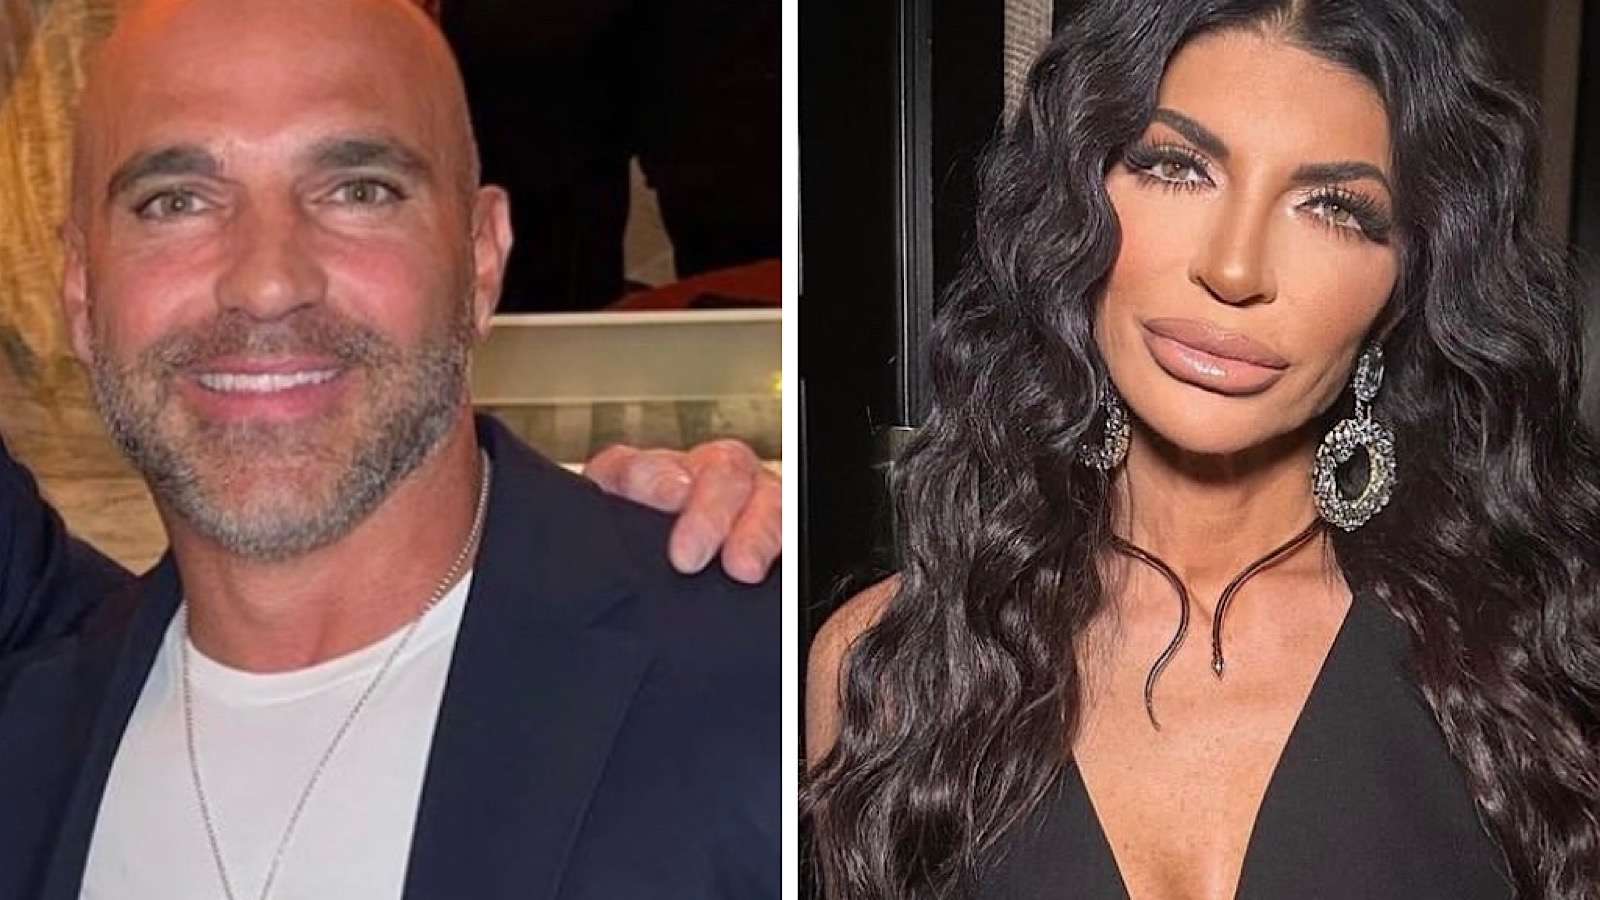 teresa giudice was booed by a bravocon audience for saying she's done with her brother joe gorga